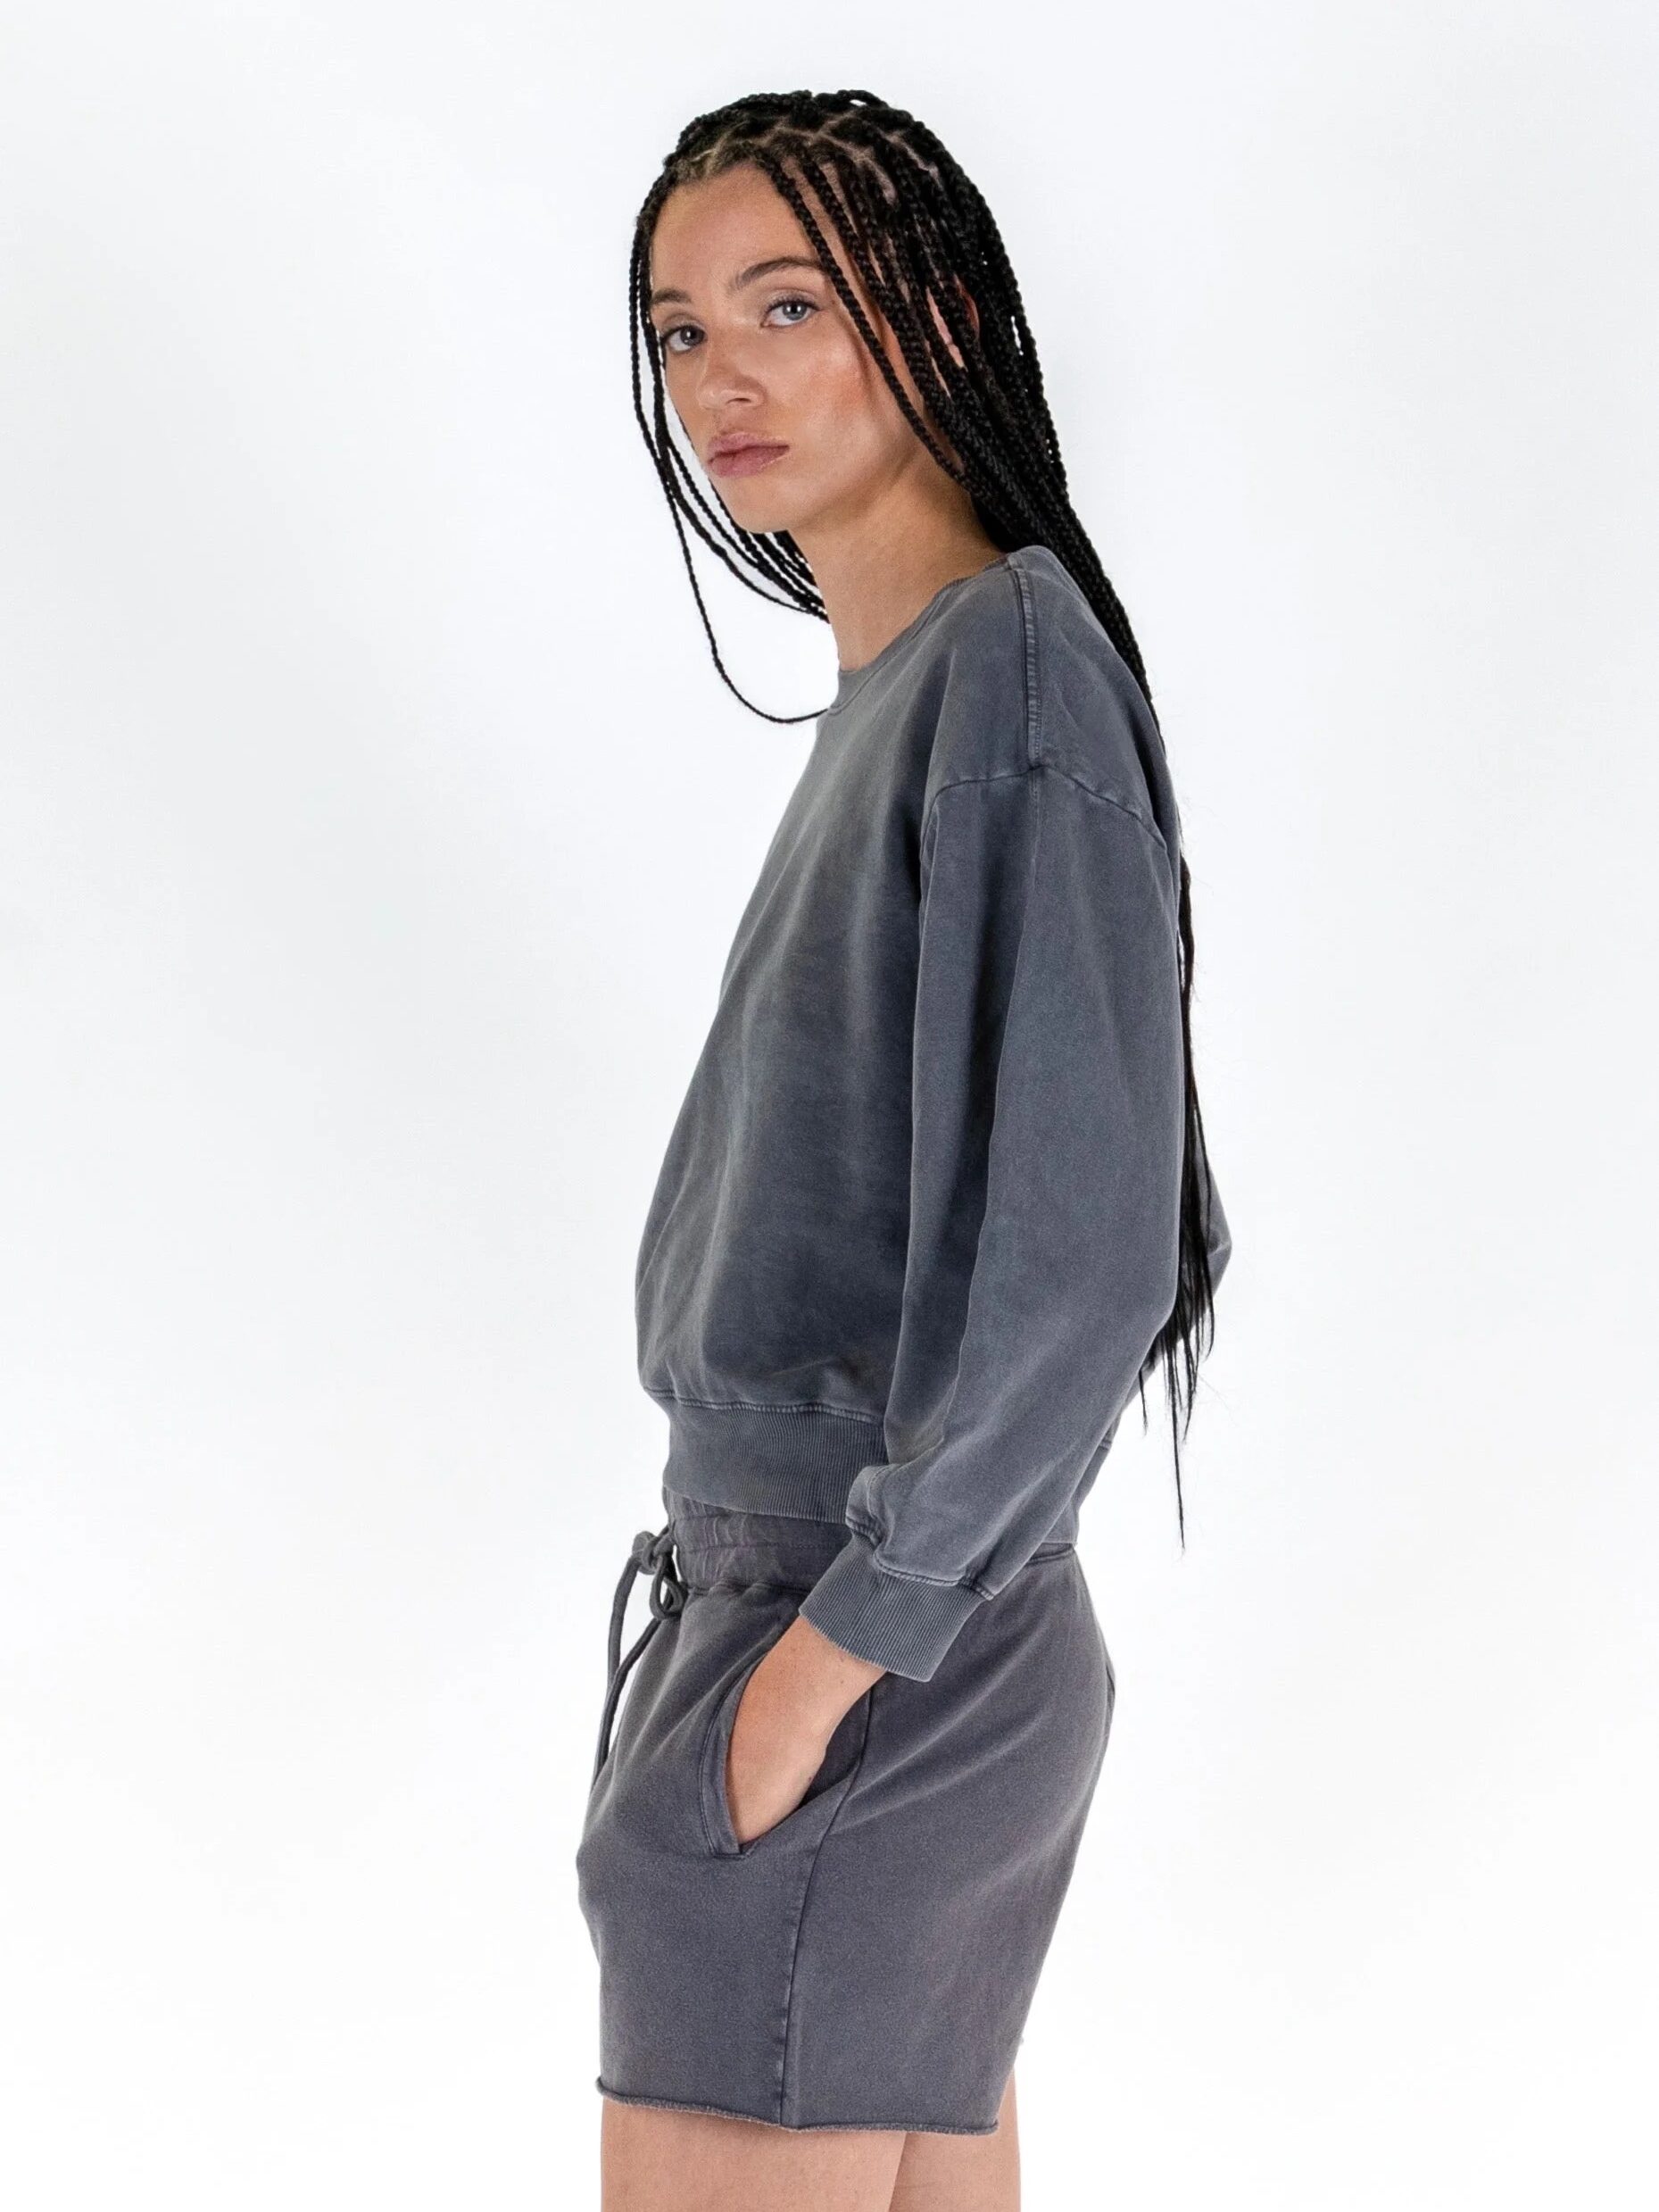 Woman in a gray sweatshirt and skirt looking over her shoulder with wet hair styled in thin braids against a white background.